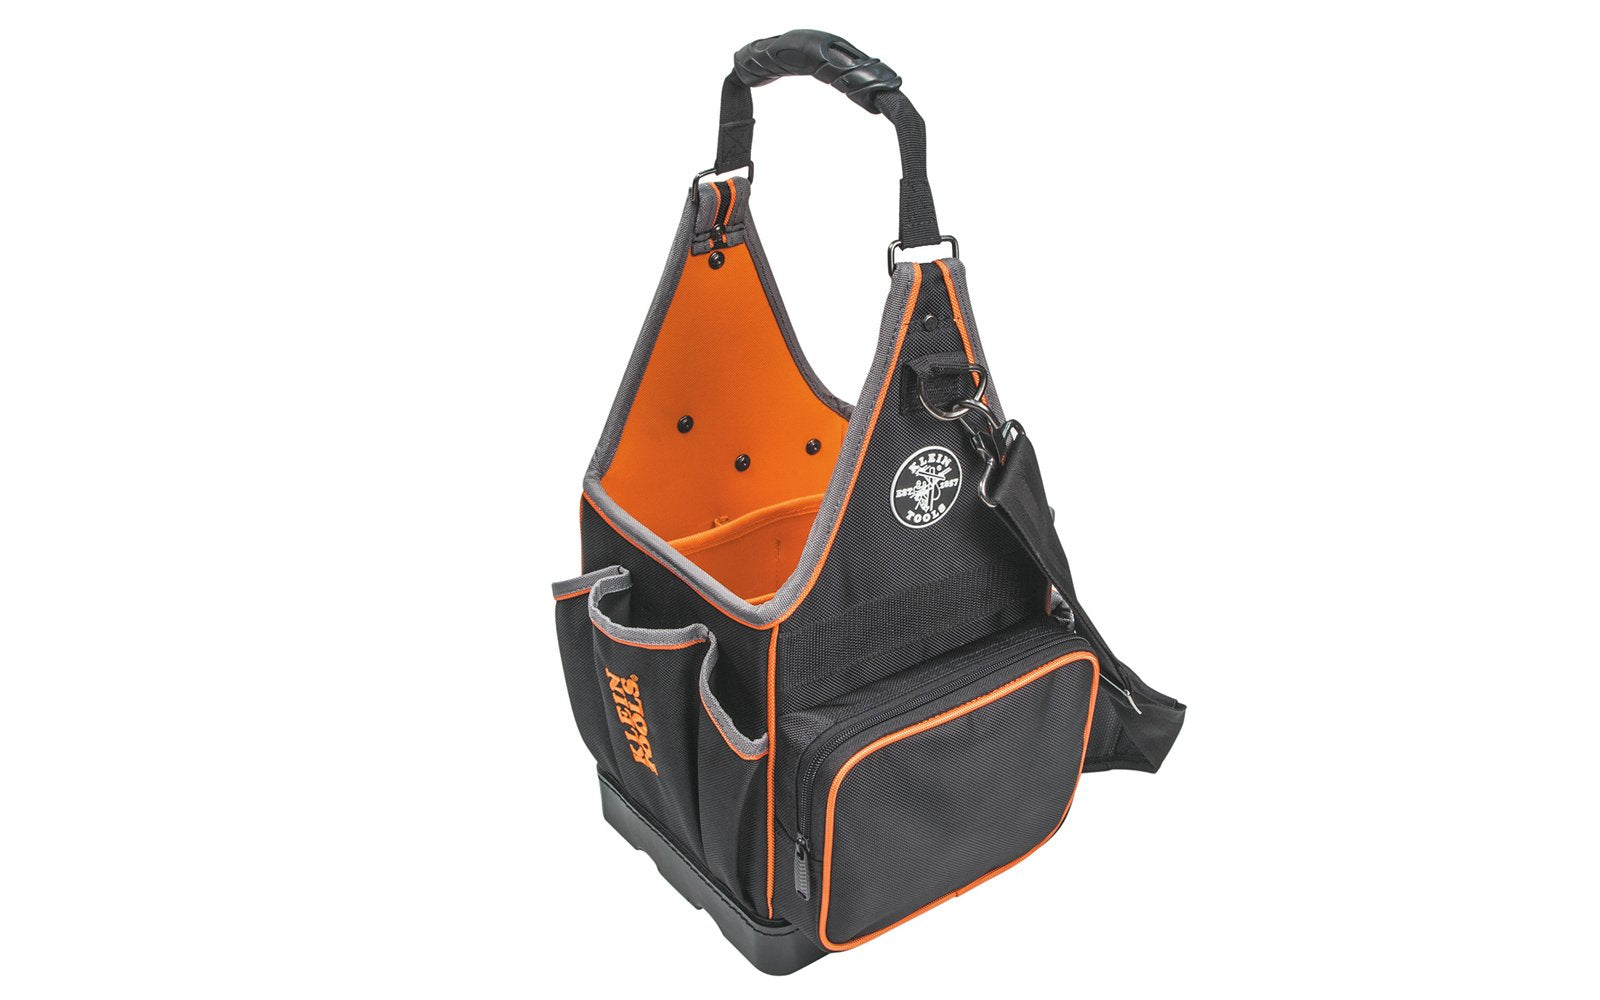 Klein Tools - Model 554158-14 - 20 pockets for greater tool storage - Large zipper pocket to secure small parts & tools - Fully molded bottom for stability & protects from the elements - Orange interior to find tools faster - 1680d ballistic weave for durability - Shoulder strap with extra padding & handles 